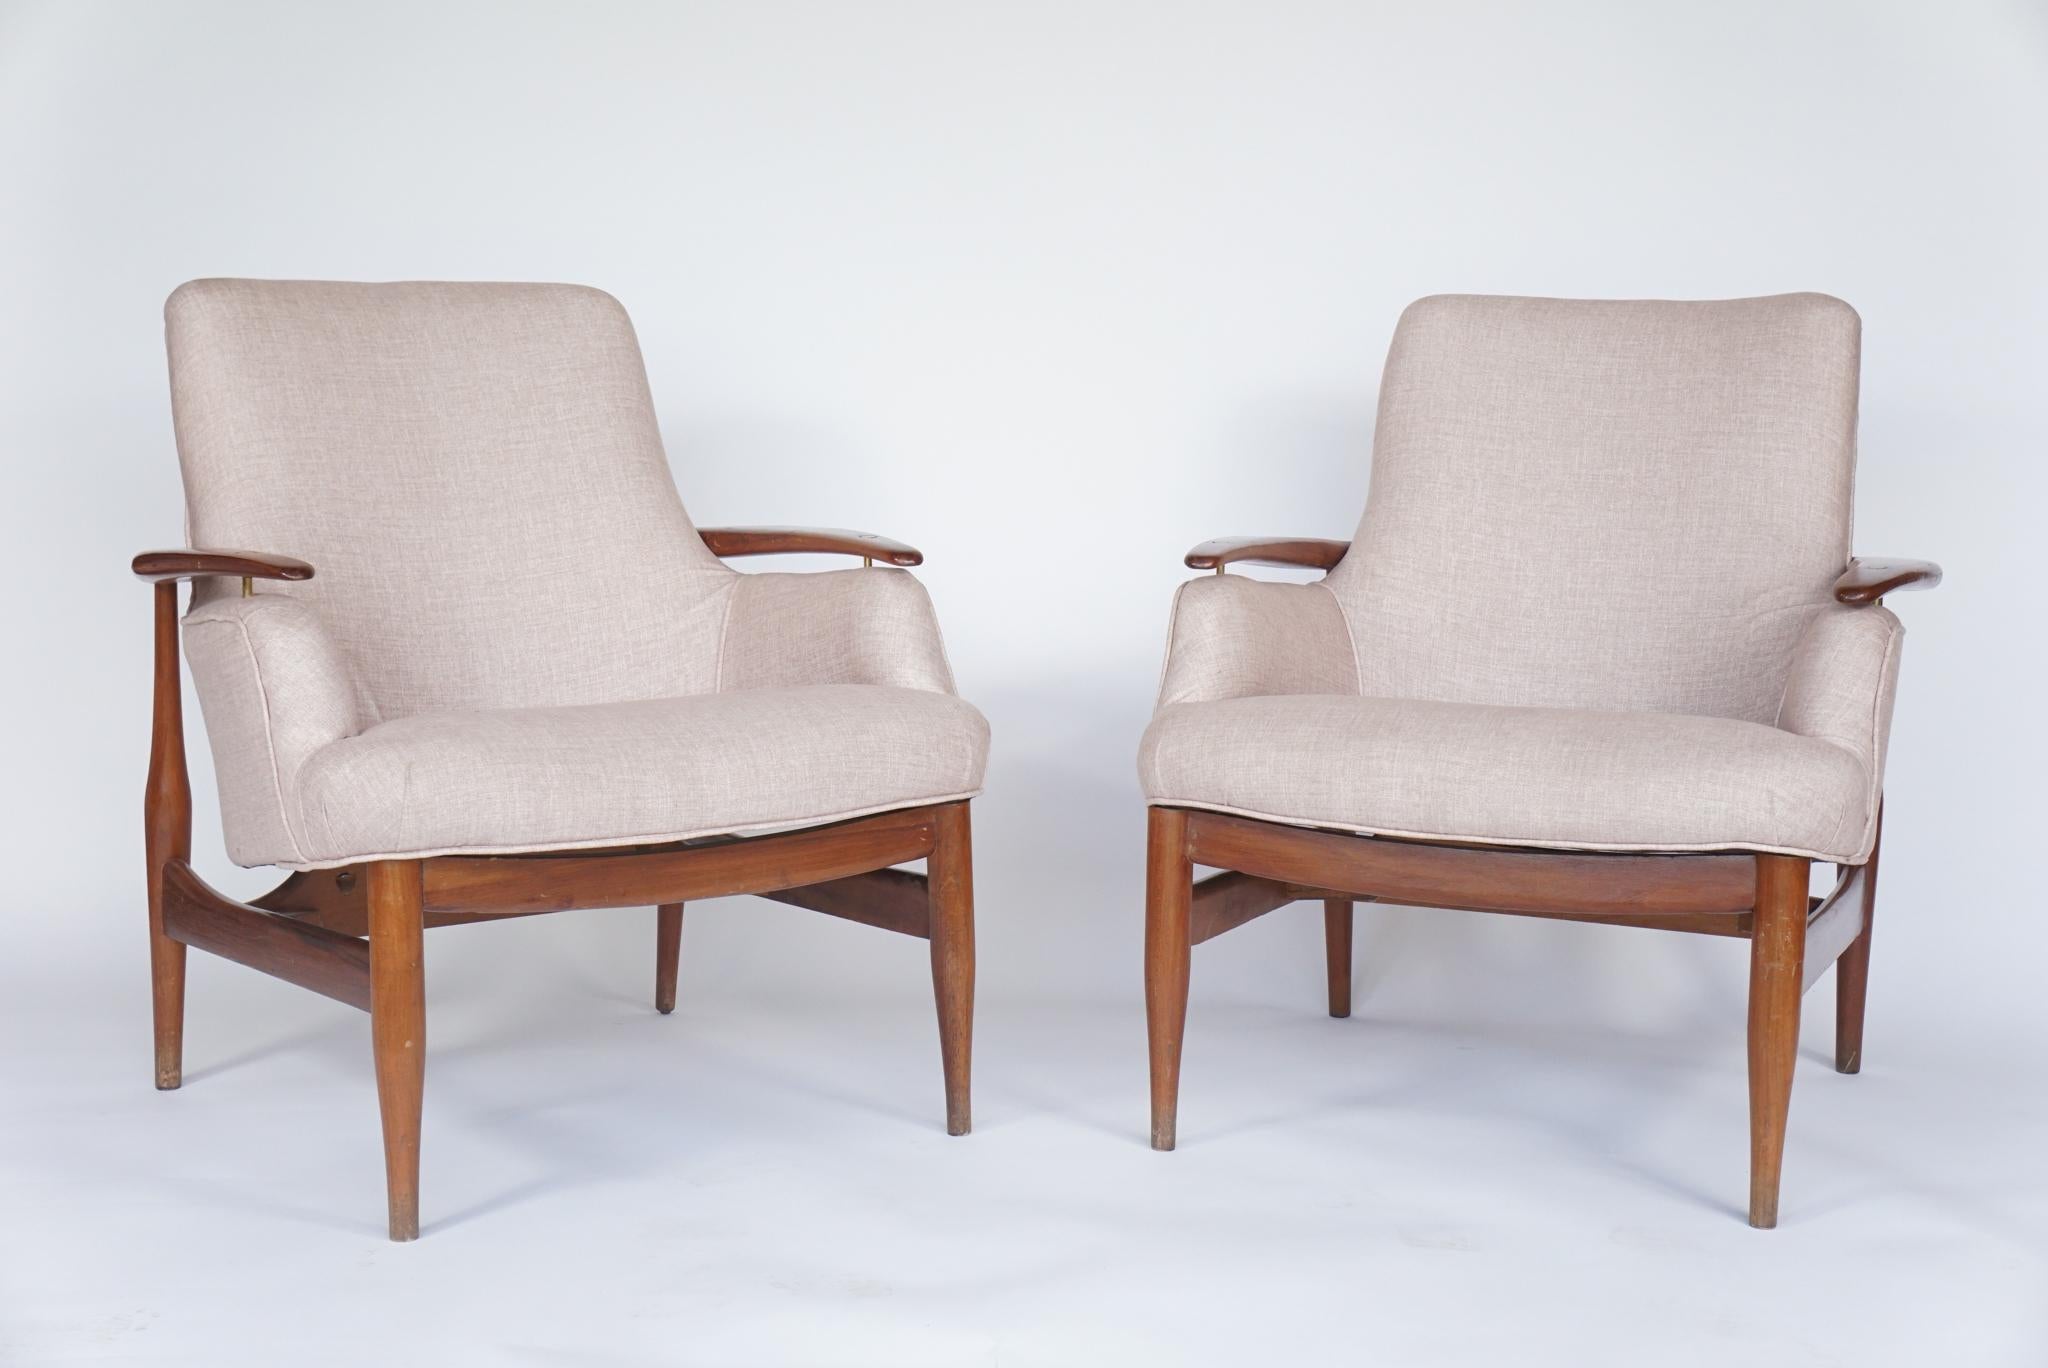 Pair of armchairs in the manner of Finn Juhl. Based on his model NV 53 chair, this Danish chair has floating armrests, with brass fittings sublime, Airy design with new upholstery.